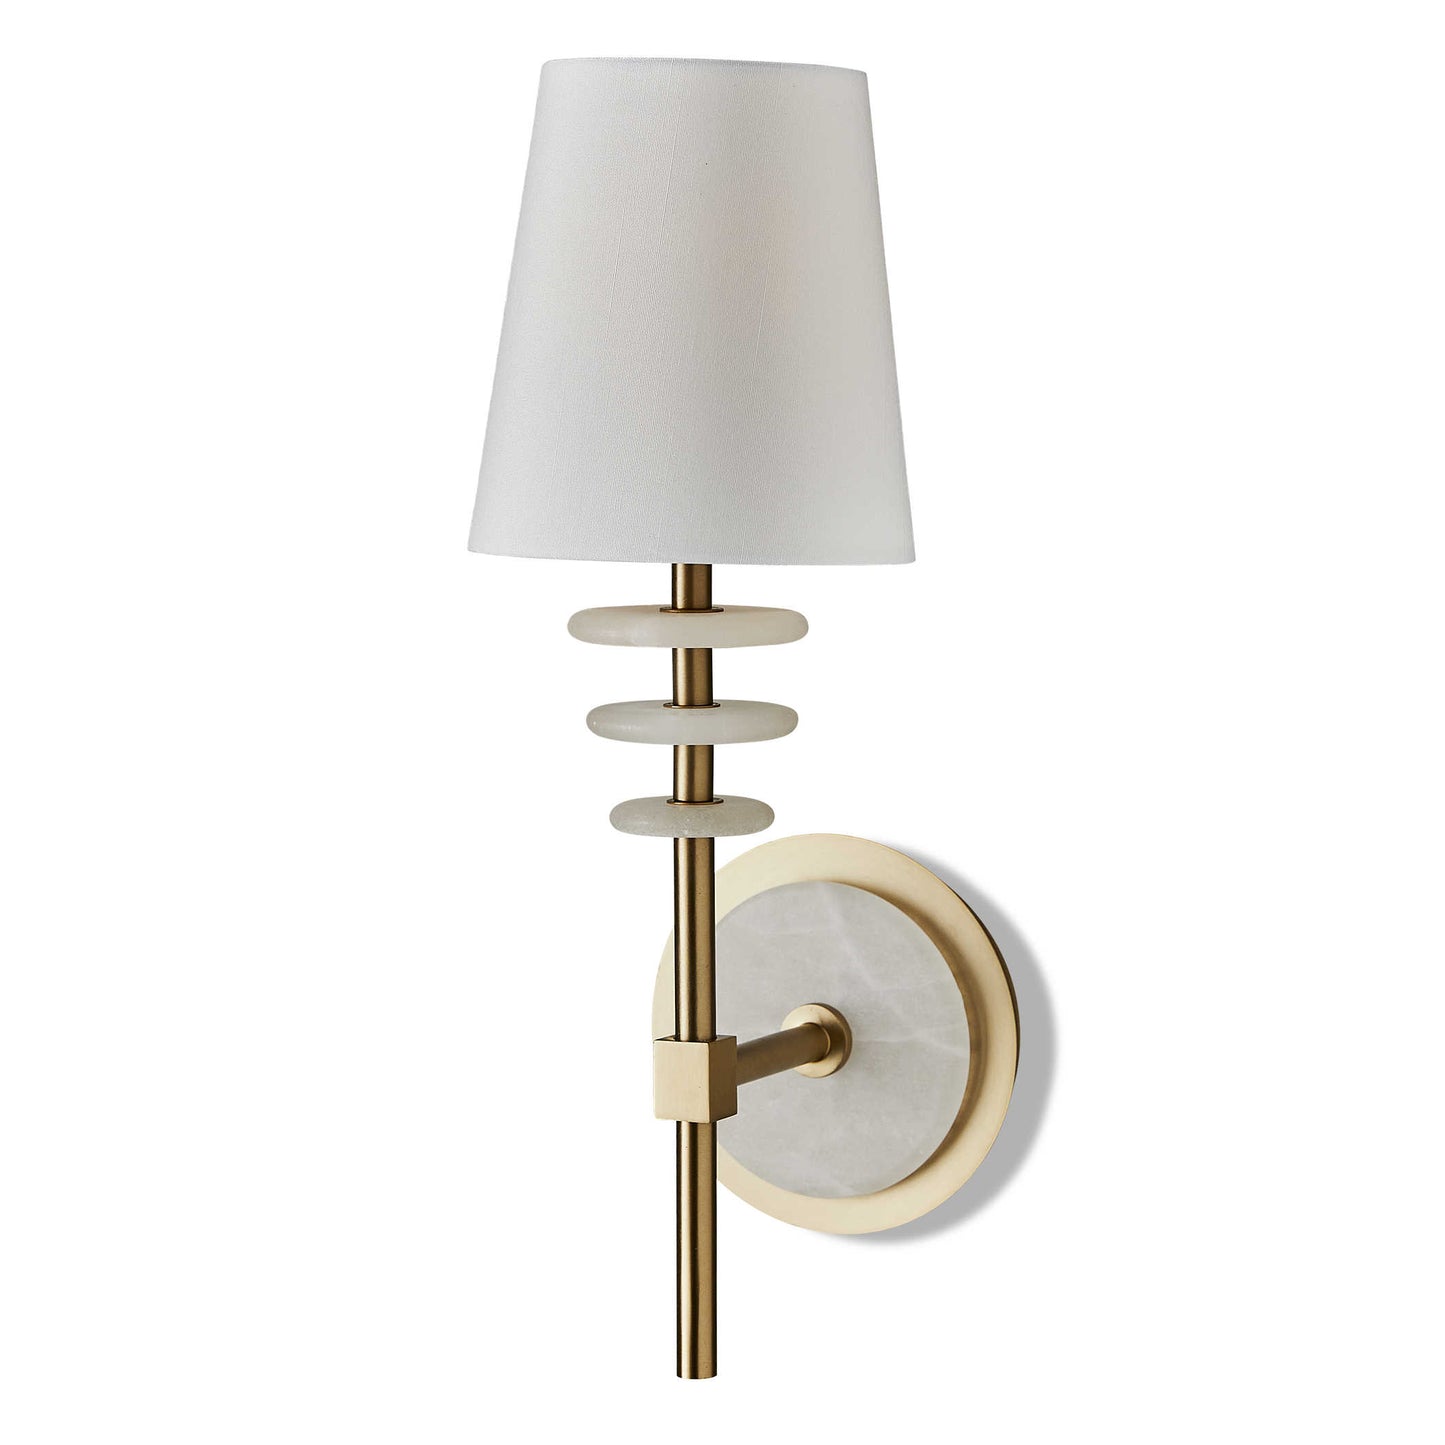 ALABASTER TORCH WALL SCONCE